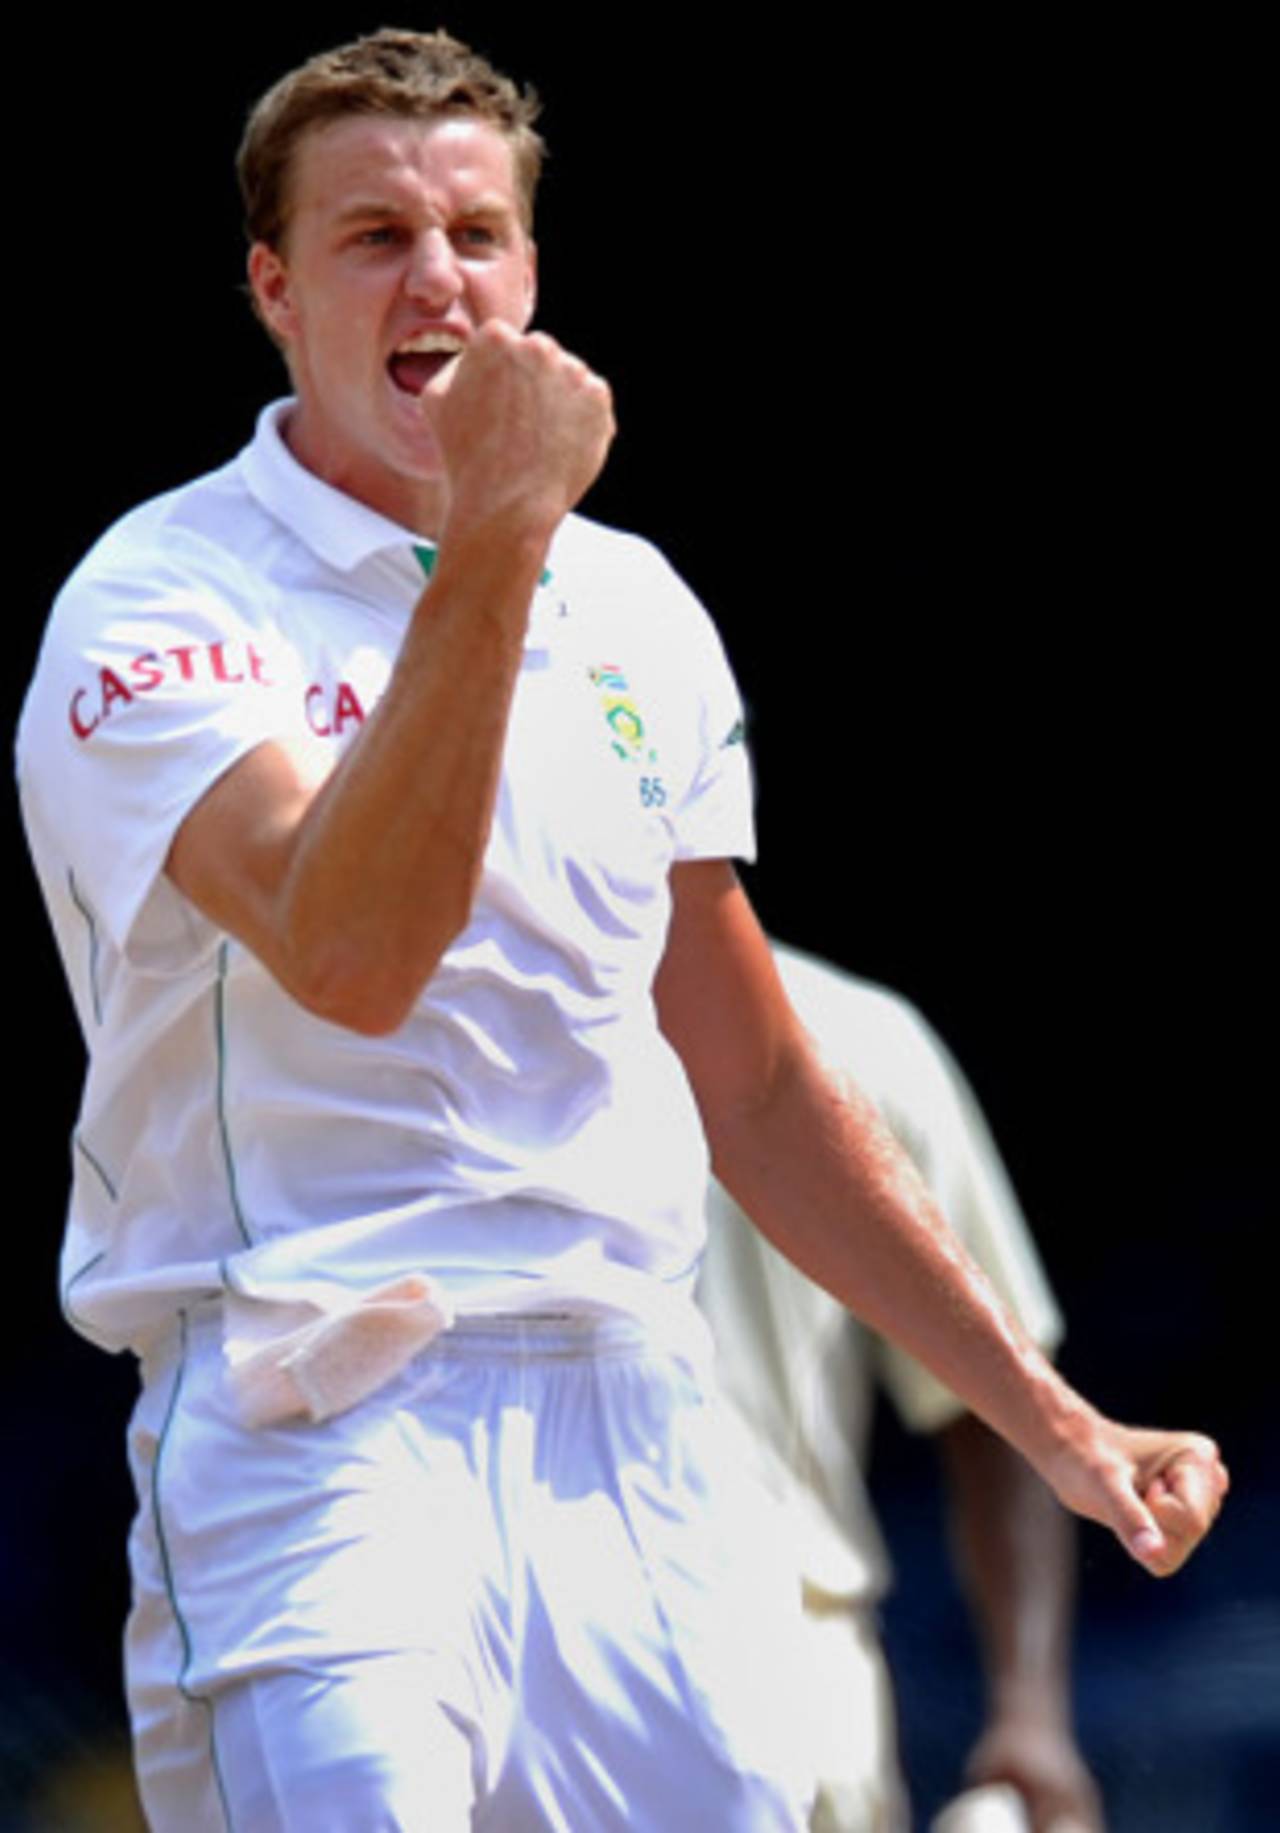 Morne Morkel celebrates after claiming the crucial wicket of Chris Gayle for the second time in the match, West Indies v South Africa, 1st Test, Trinidad, 4th day, June 13, 2010